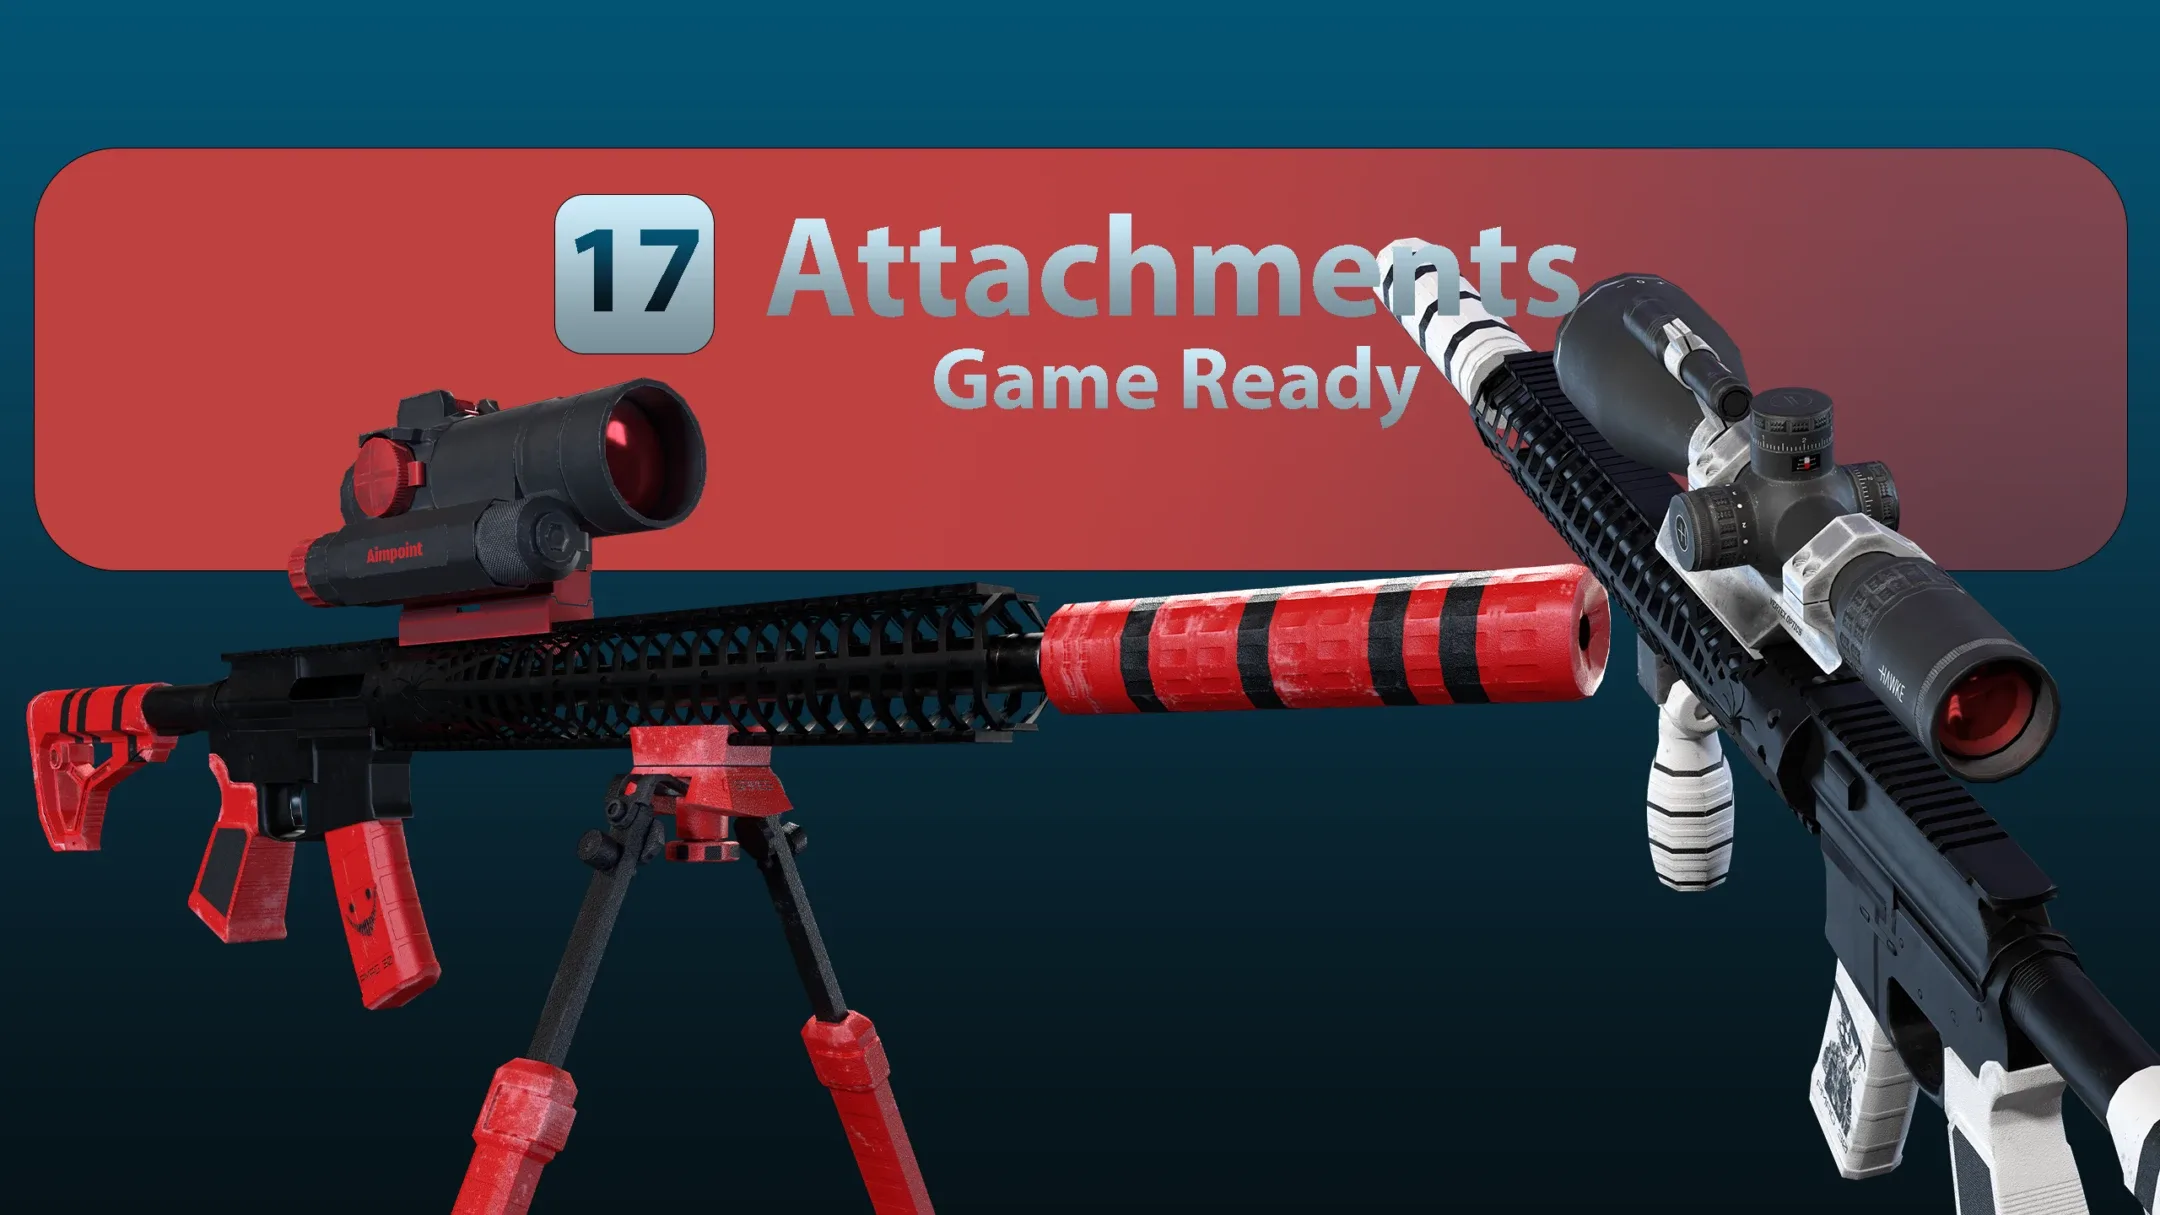 M4 + 17 Attachments + 15 Skins Low-poly 3D model Vol-00 (Game Ready)